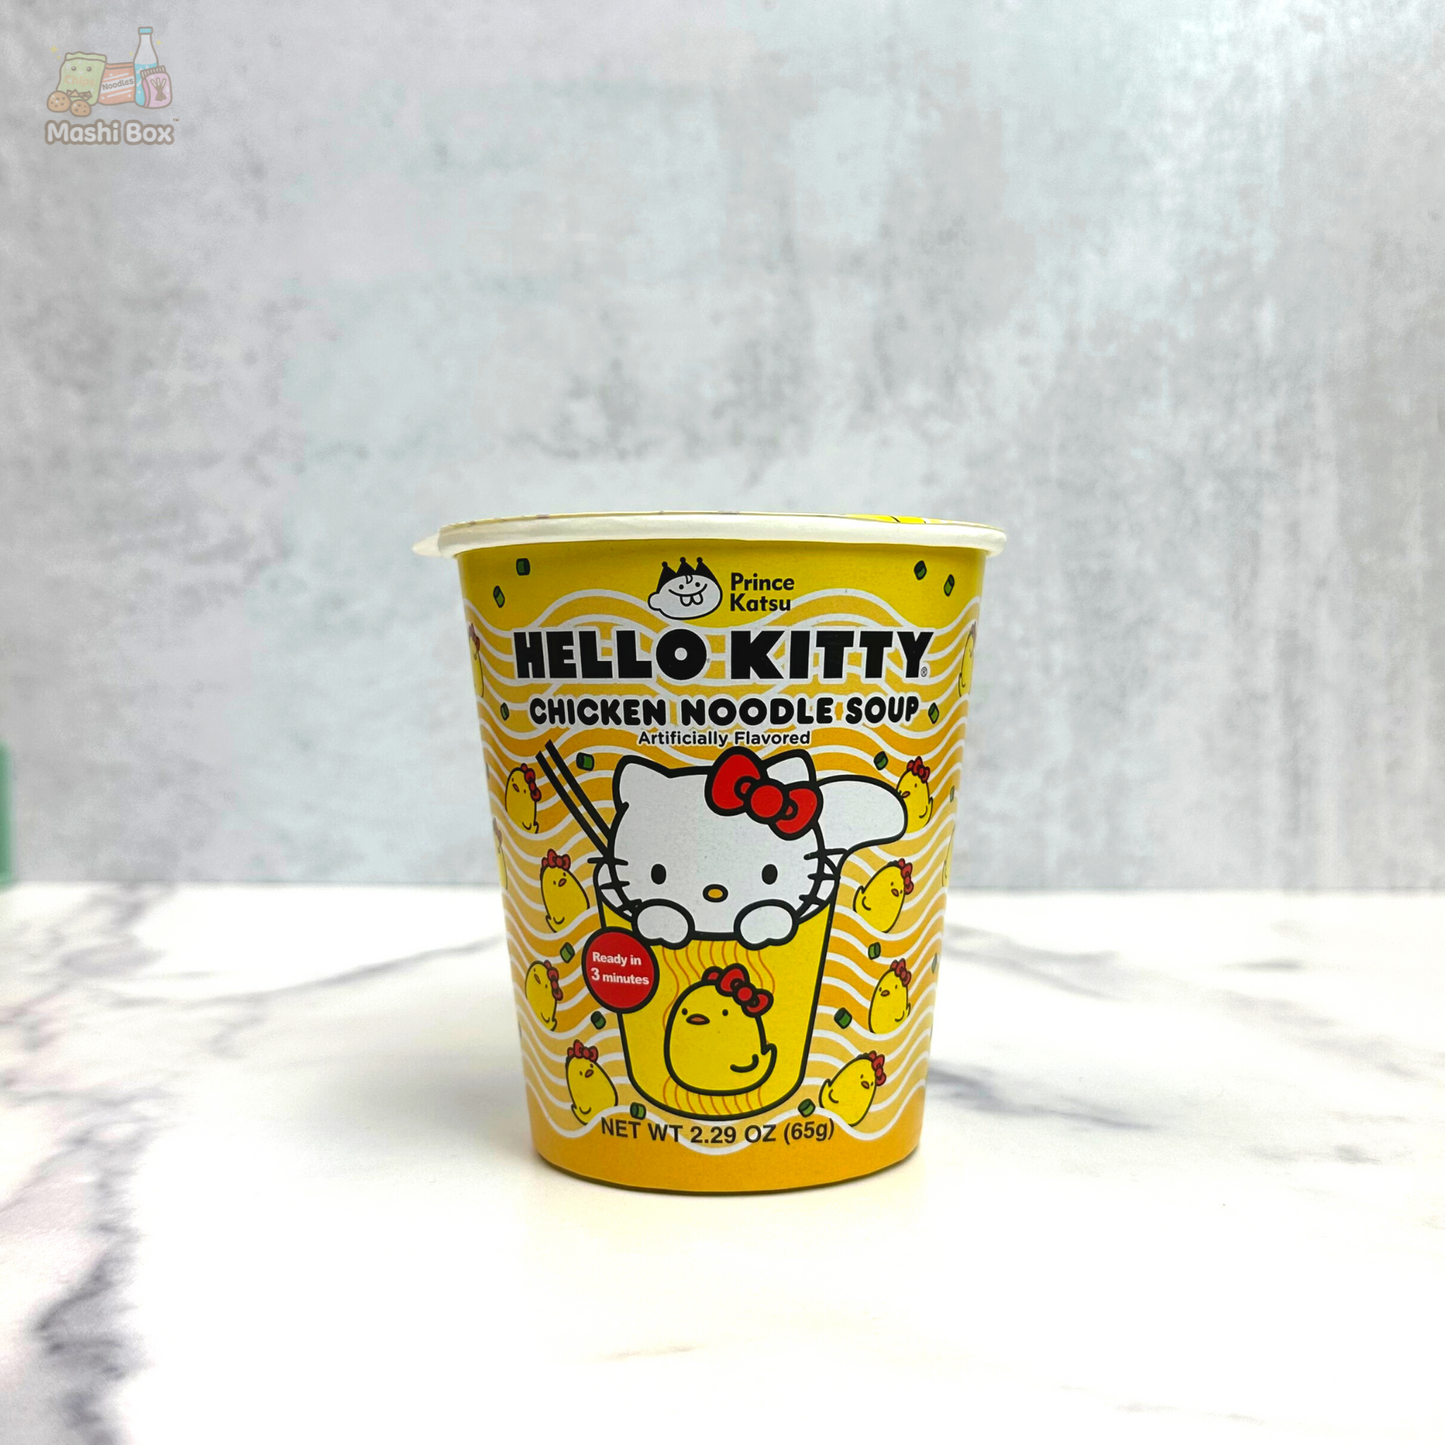 Hello Kitty Instant Chicken Noodle Soup